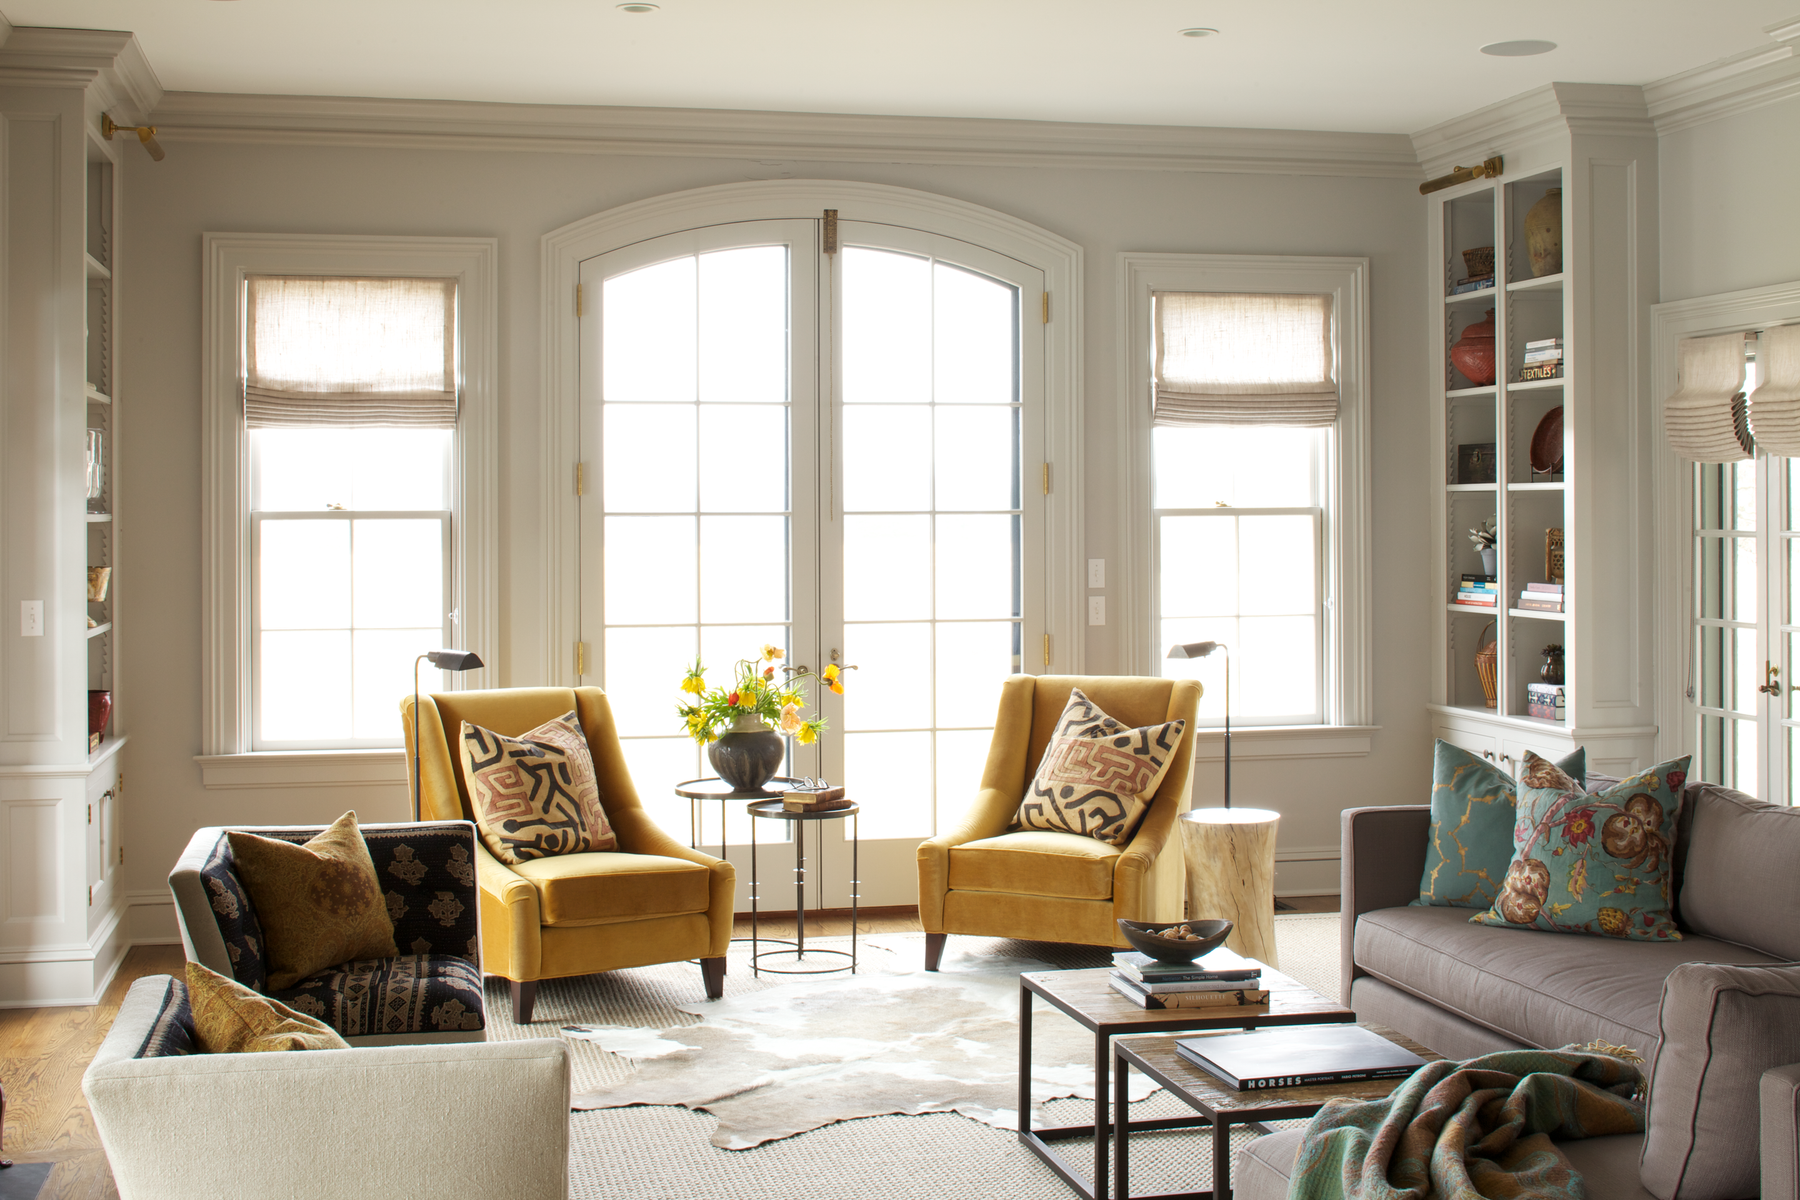 Bright styled living room with yellow chairs and french doors